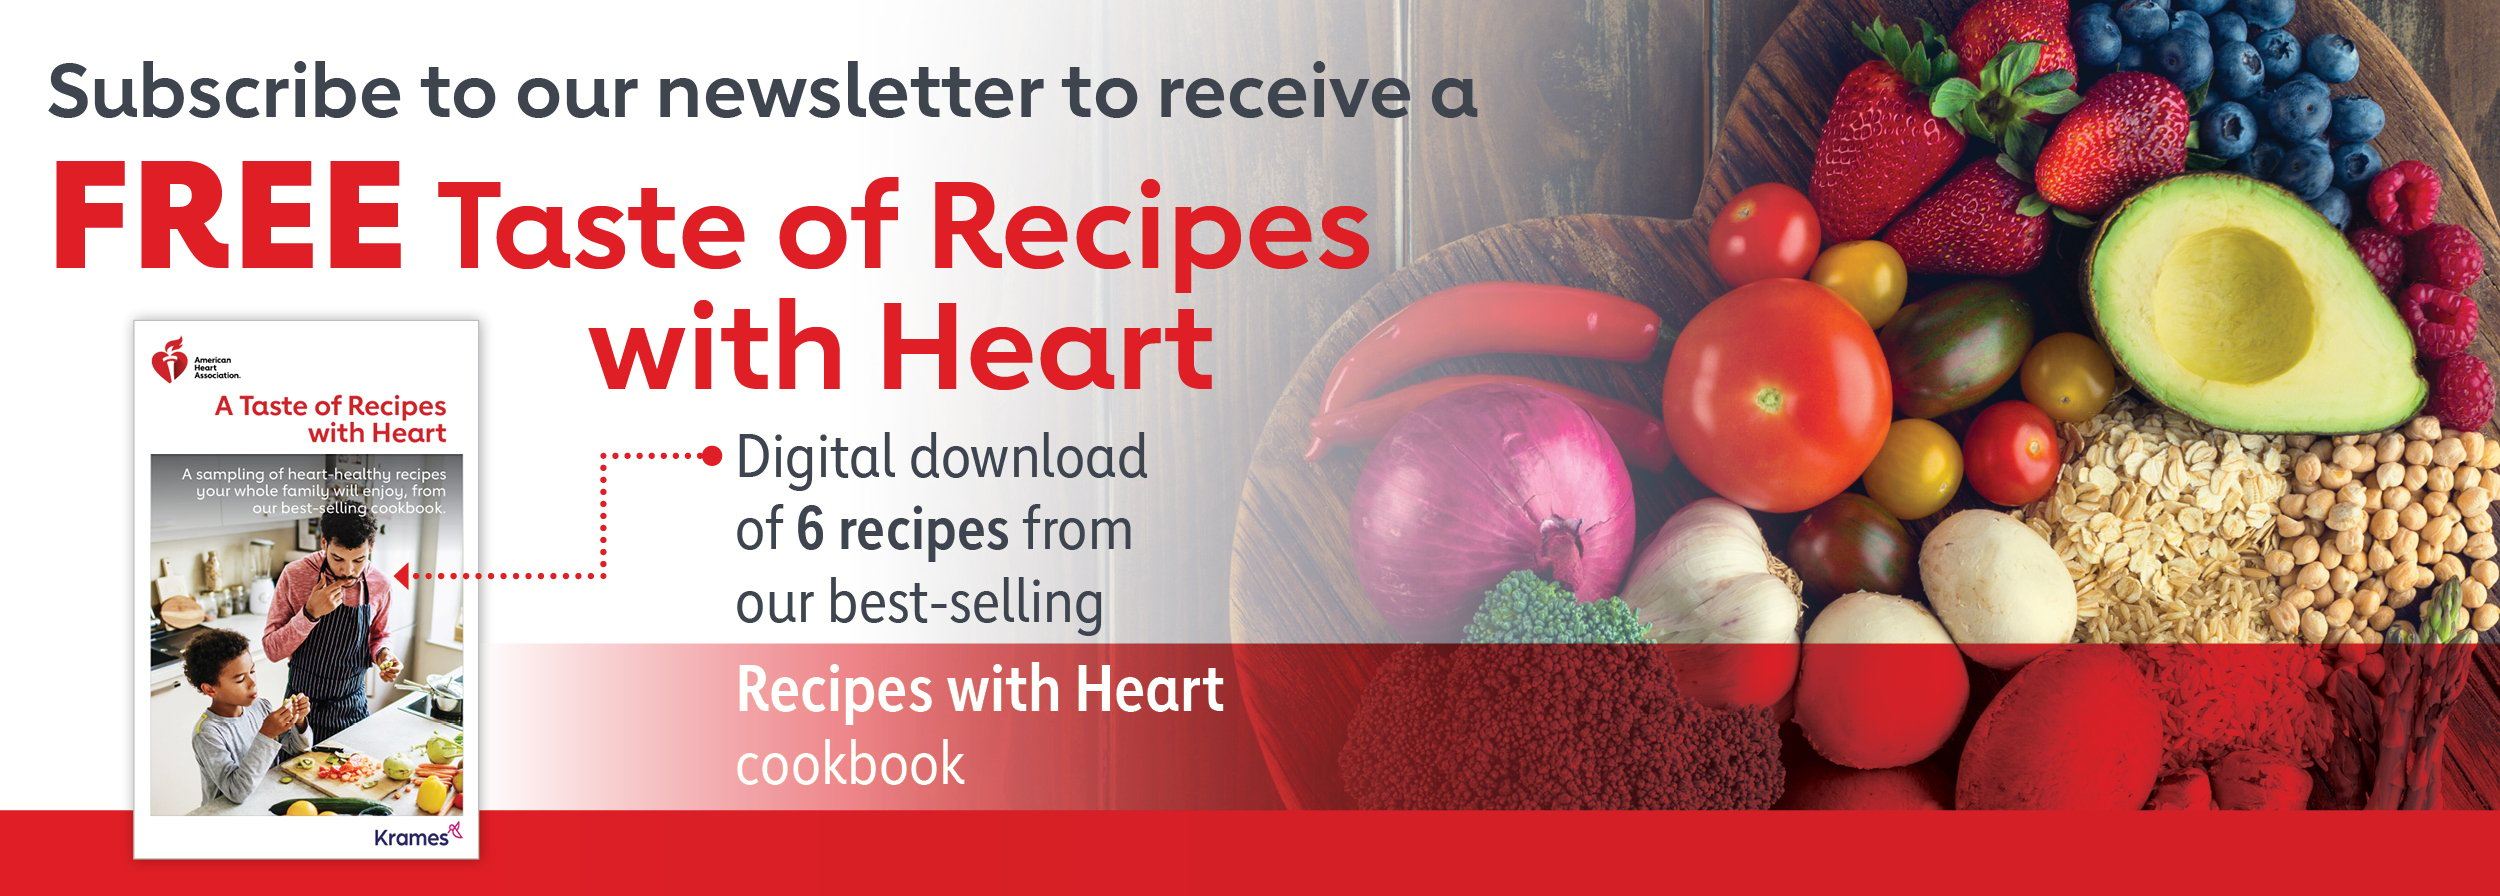 Download a free Taste of Recipes with Heart